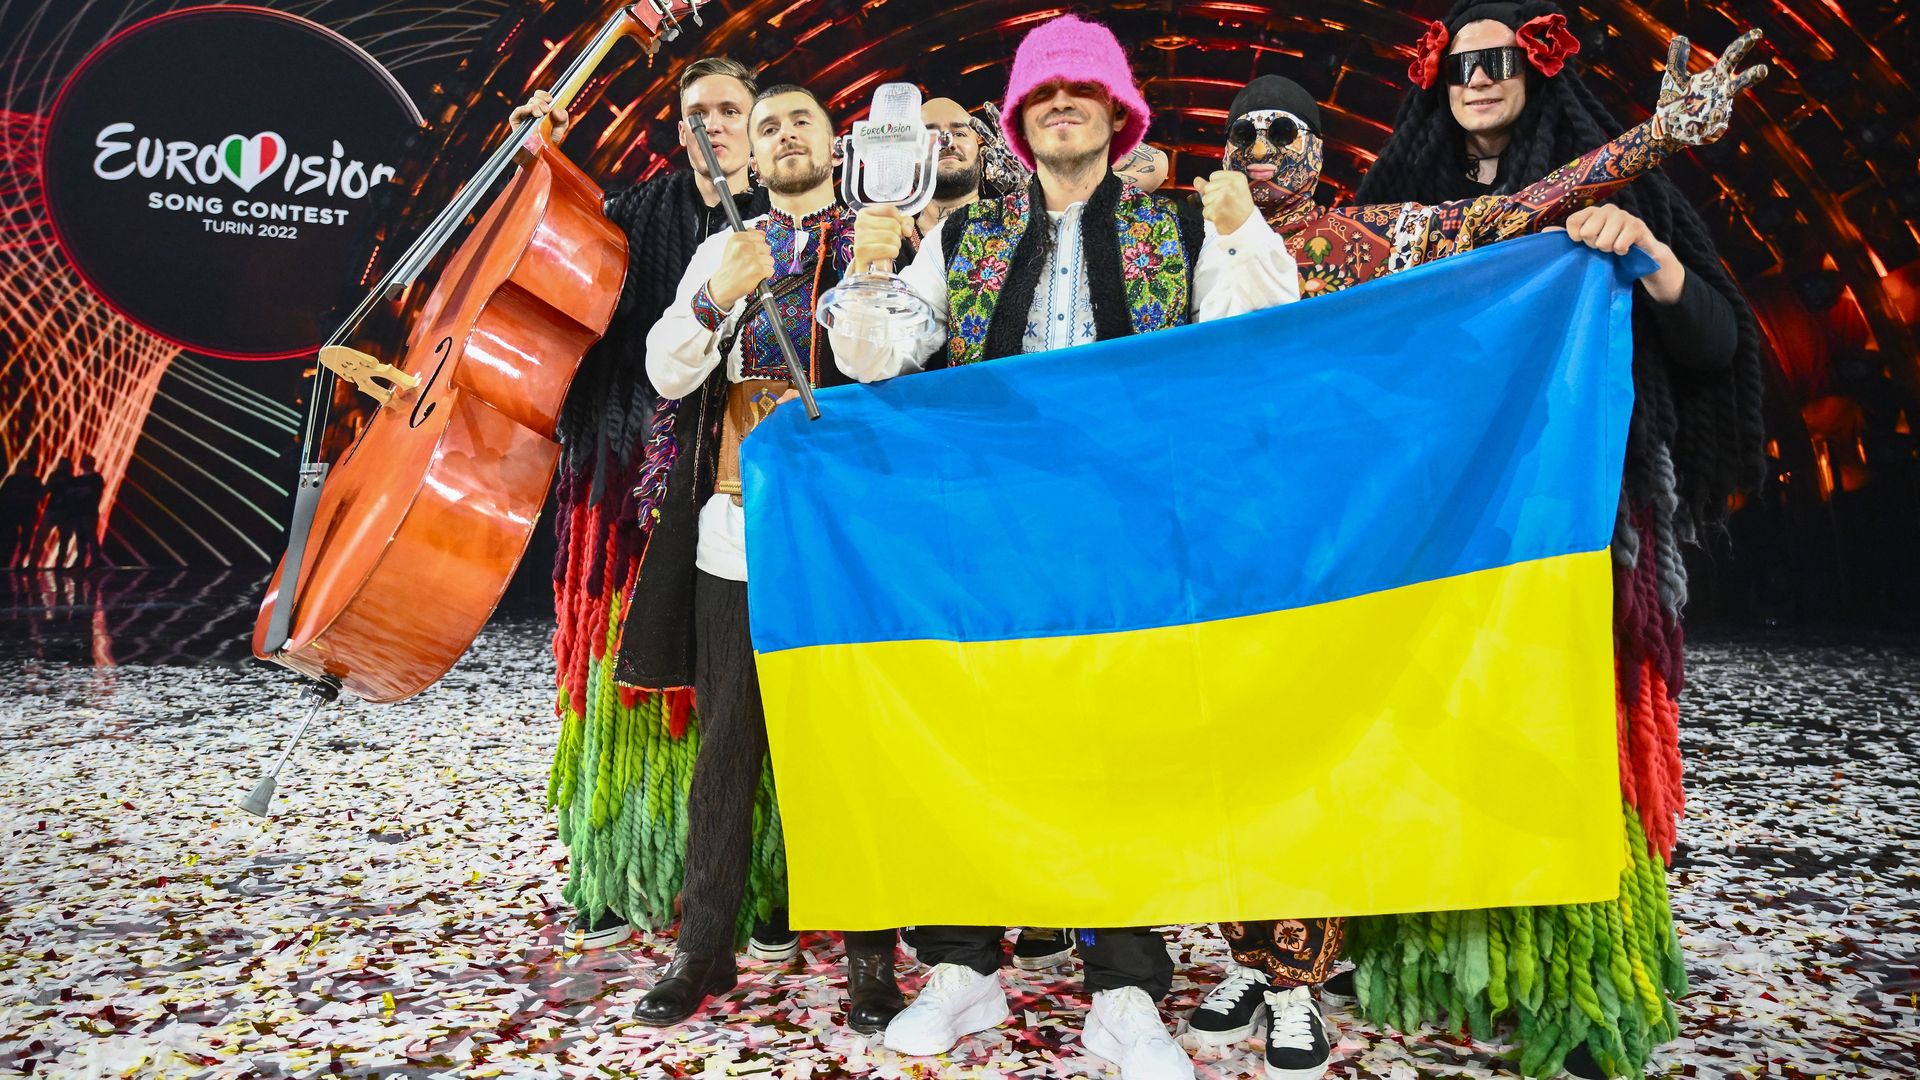 Members of the band "Kalush Orchestra" pose onstage with the winner's trophy and Ukraine's flags after winning on behalf of Ukraine the Eurovision Song contest 2022 on May 14, 2022  in Turin. 